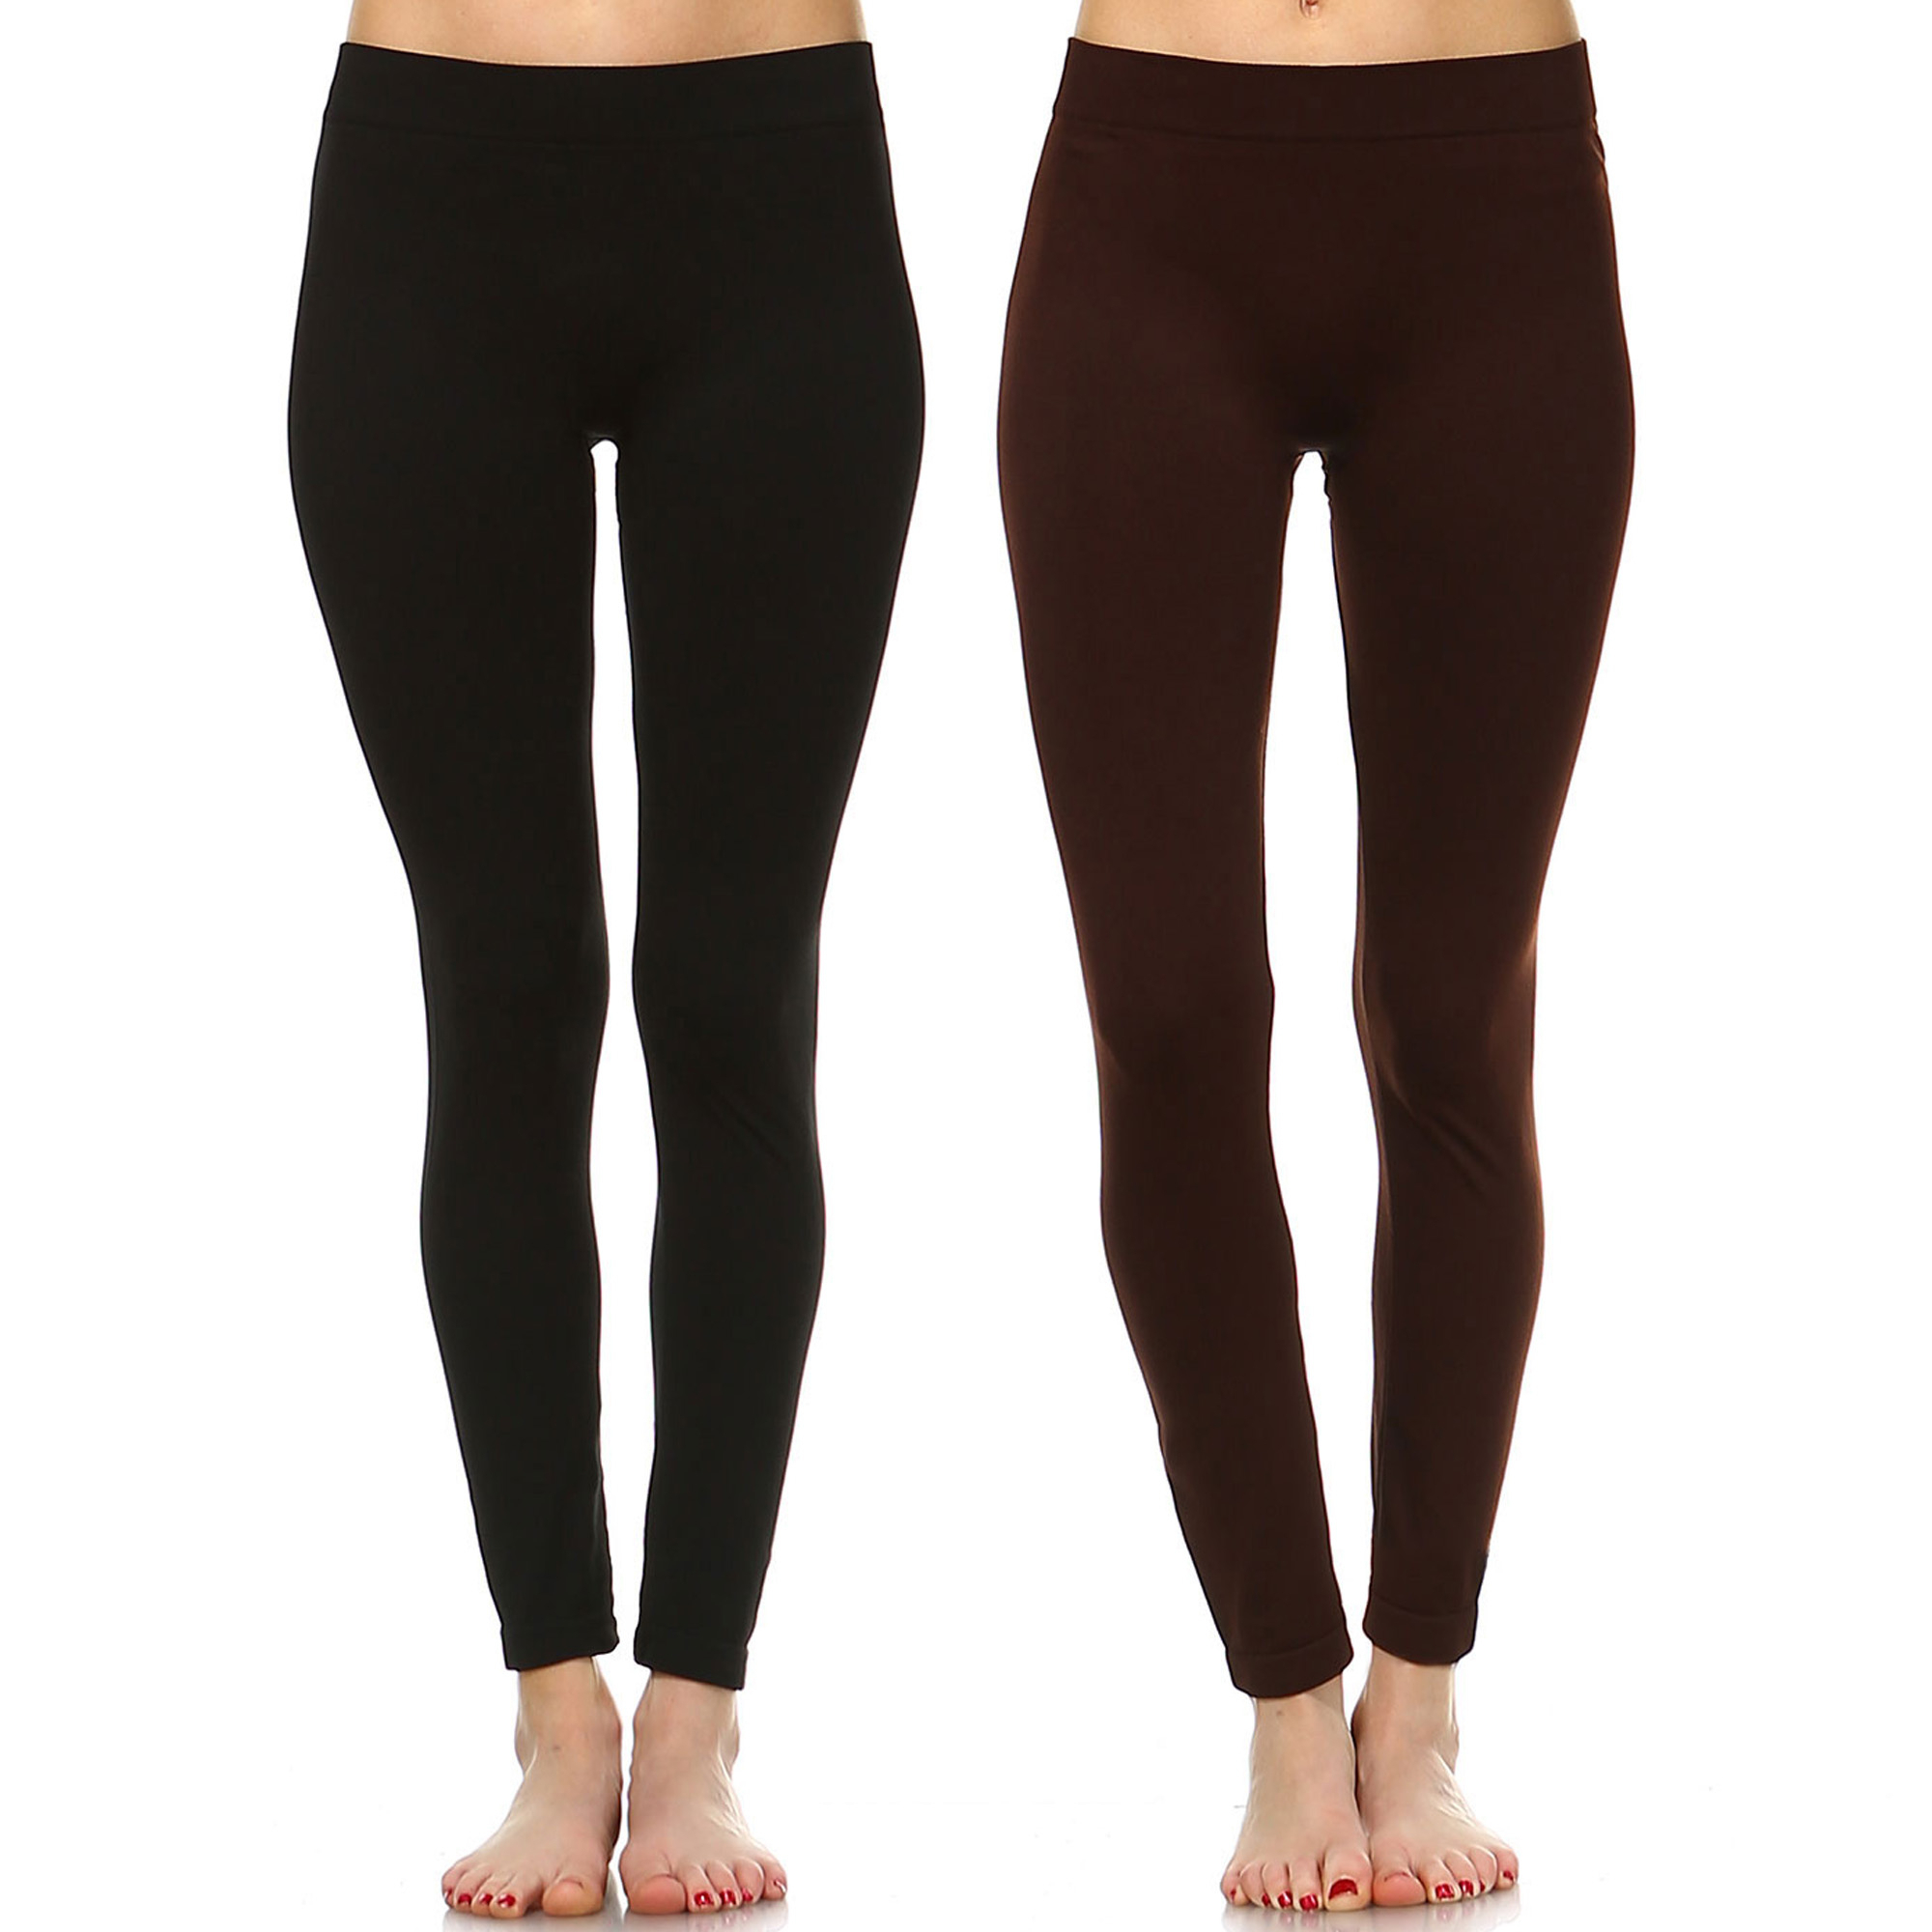 White Mark Women's Pack Of 2 Solid Color Leggings - Black, Brown, One Size - Missy